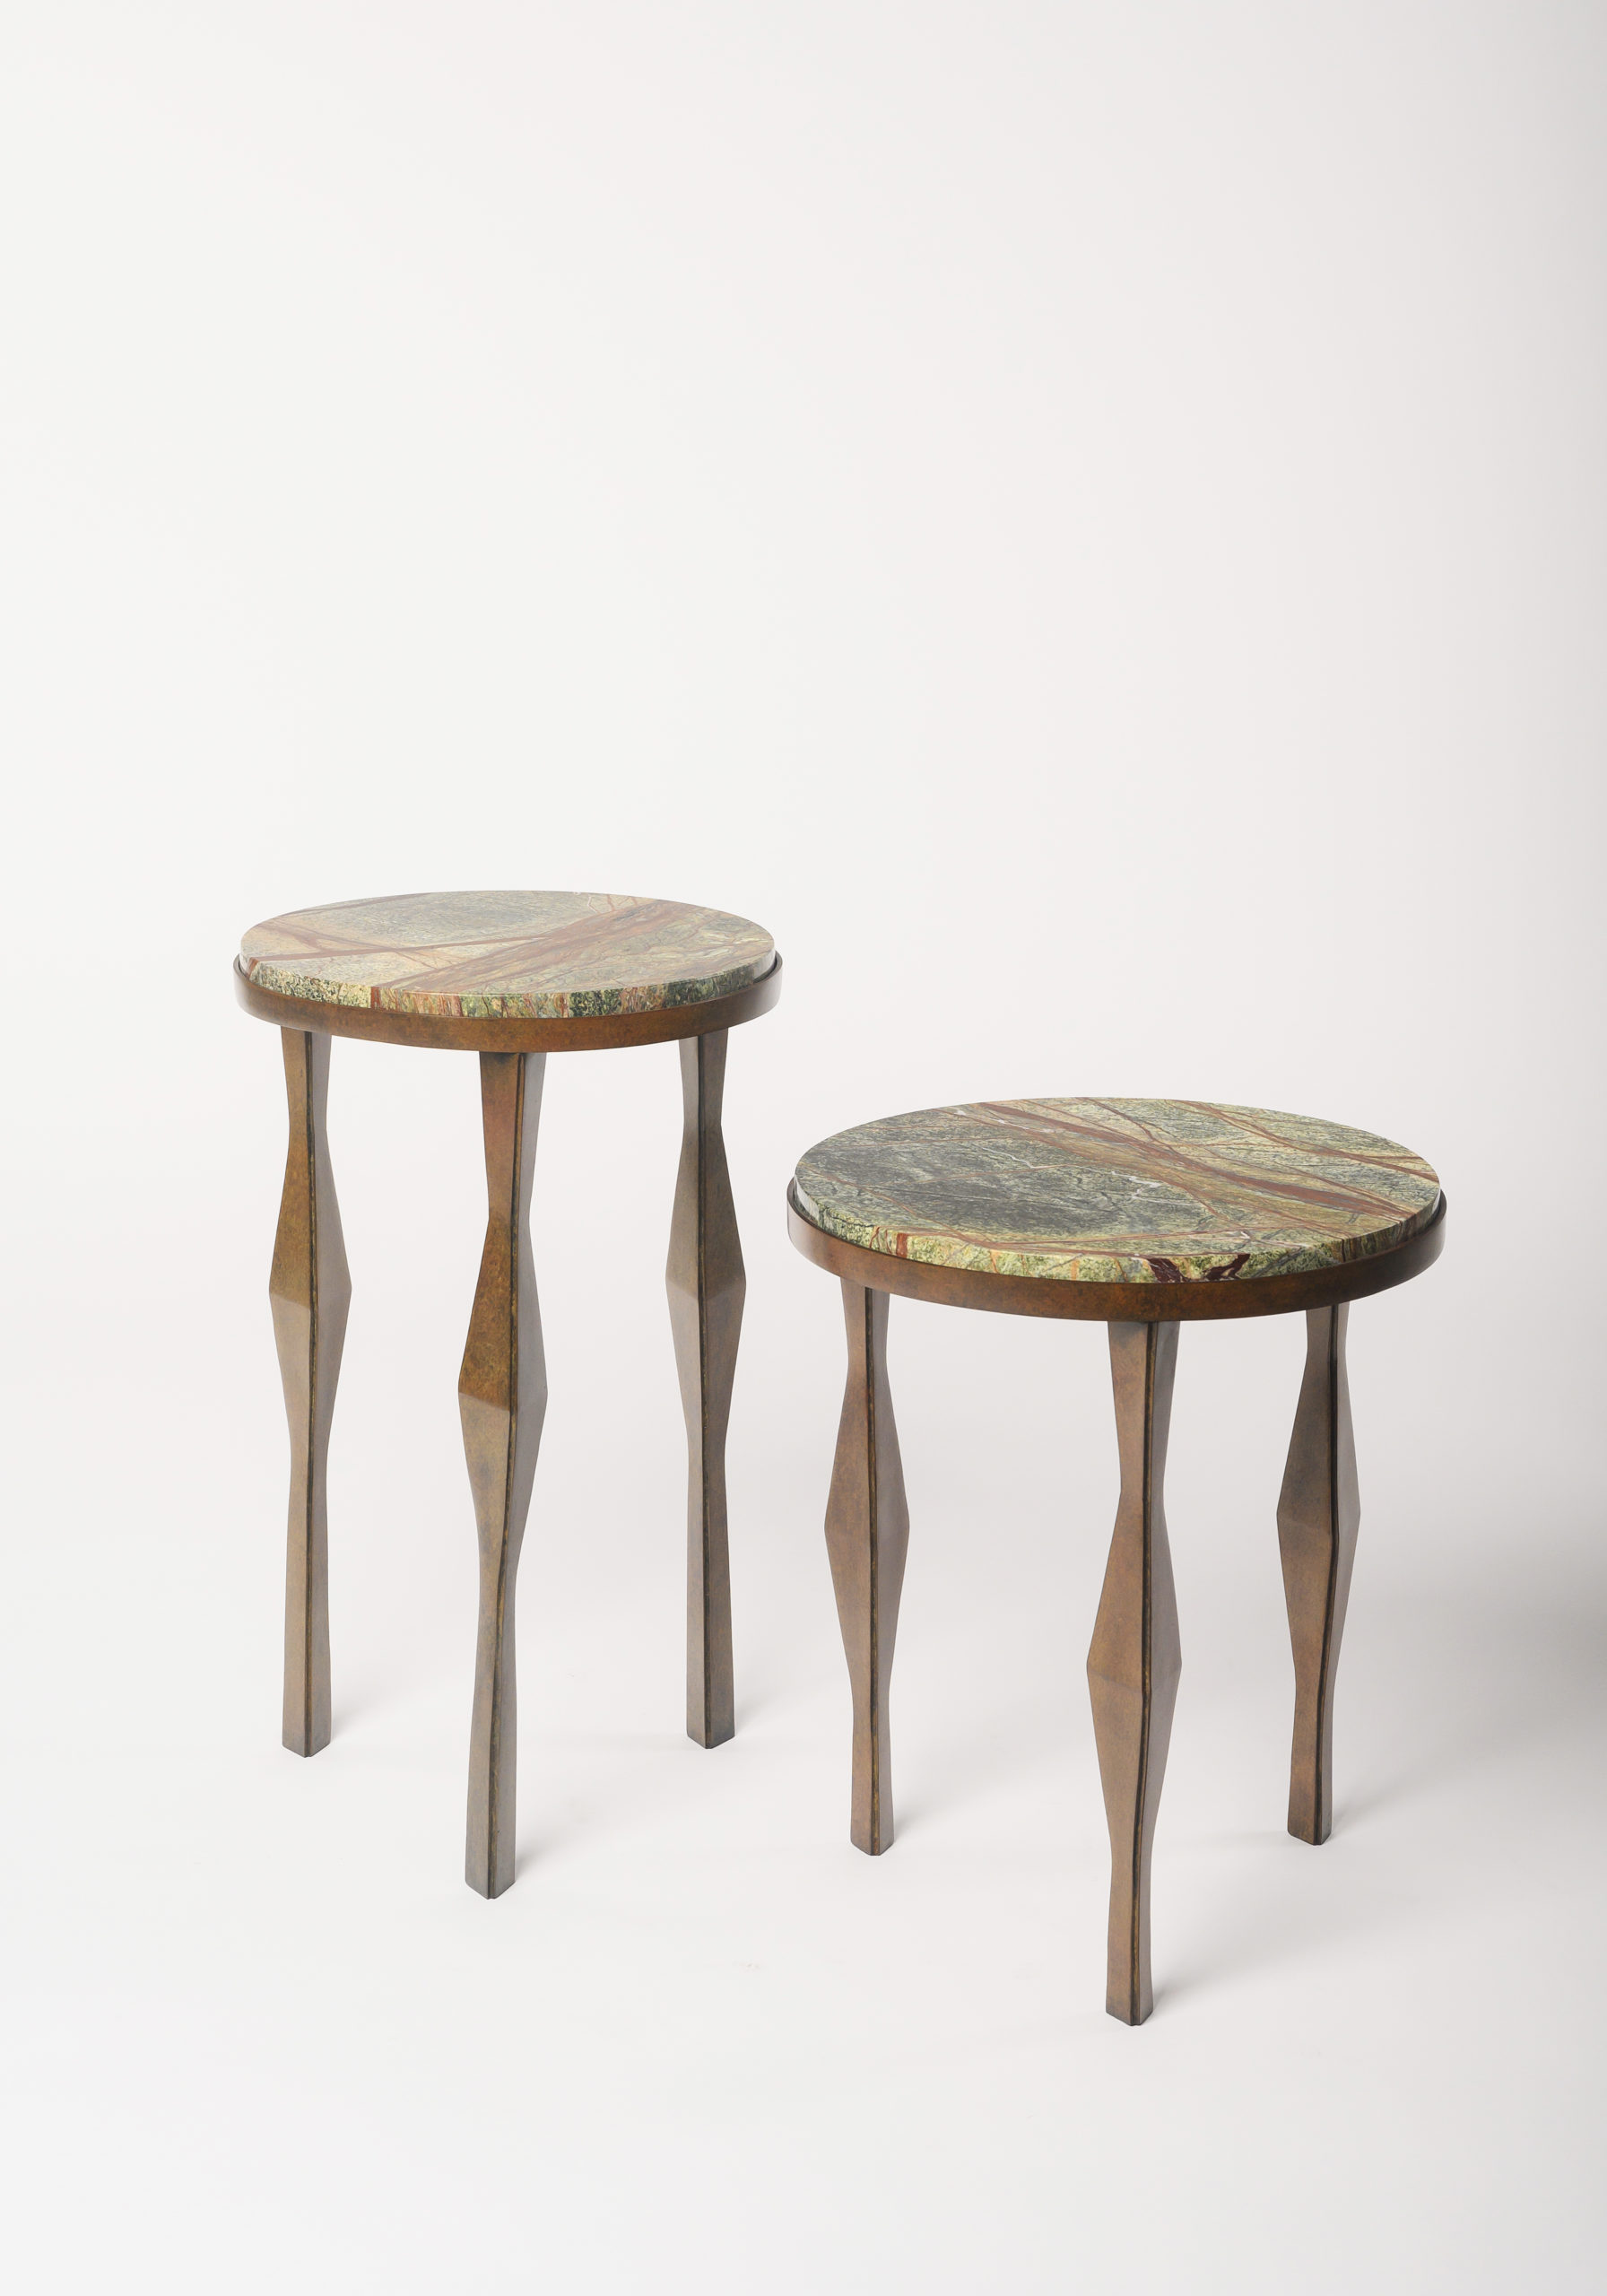 NYDC_WNWN_products_david_sutherland_Arthur_side_table_BEE_4946